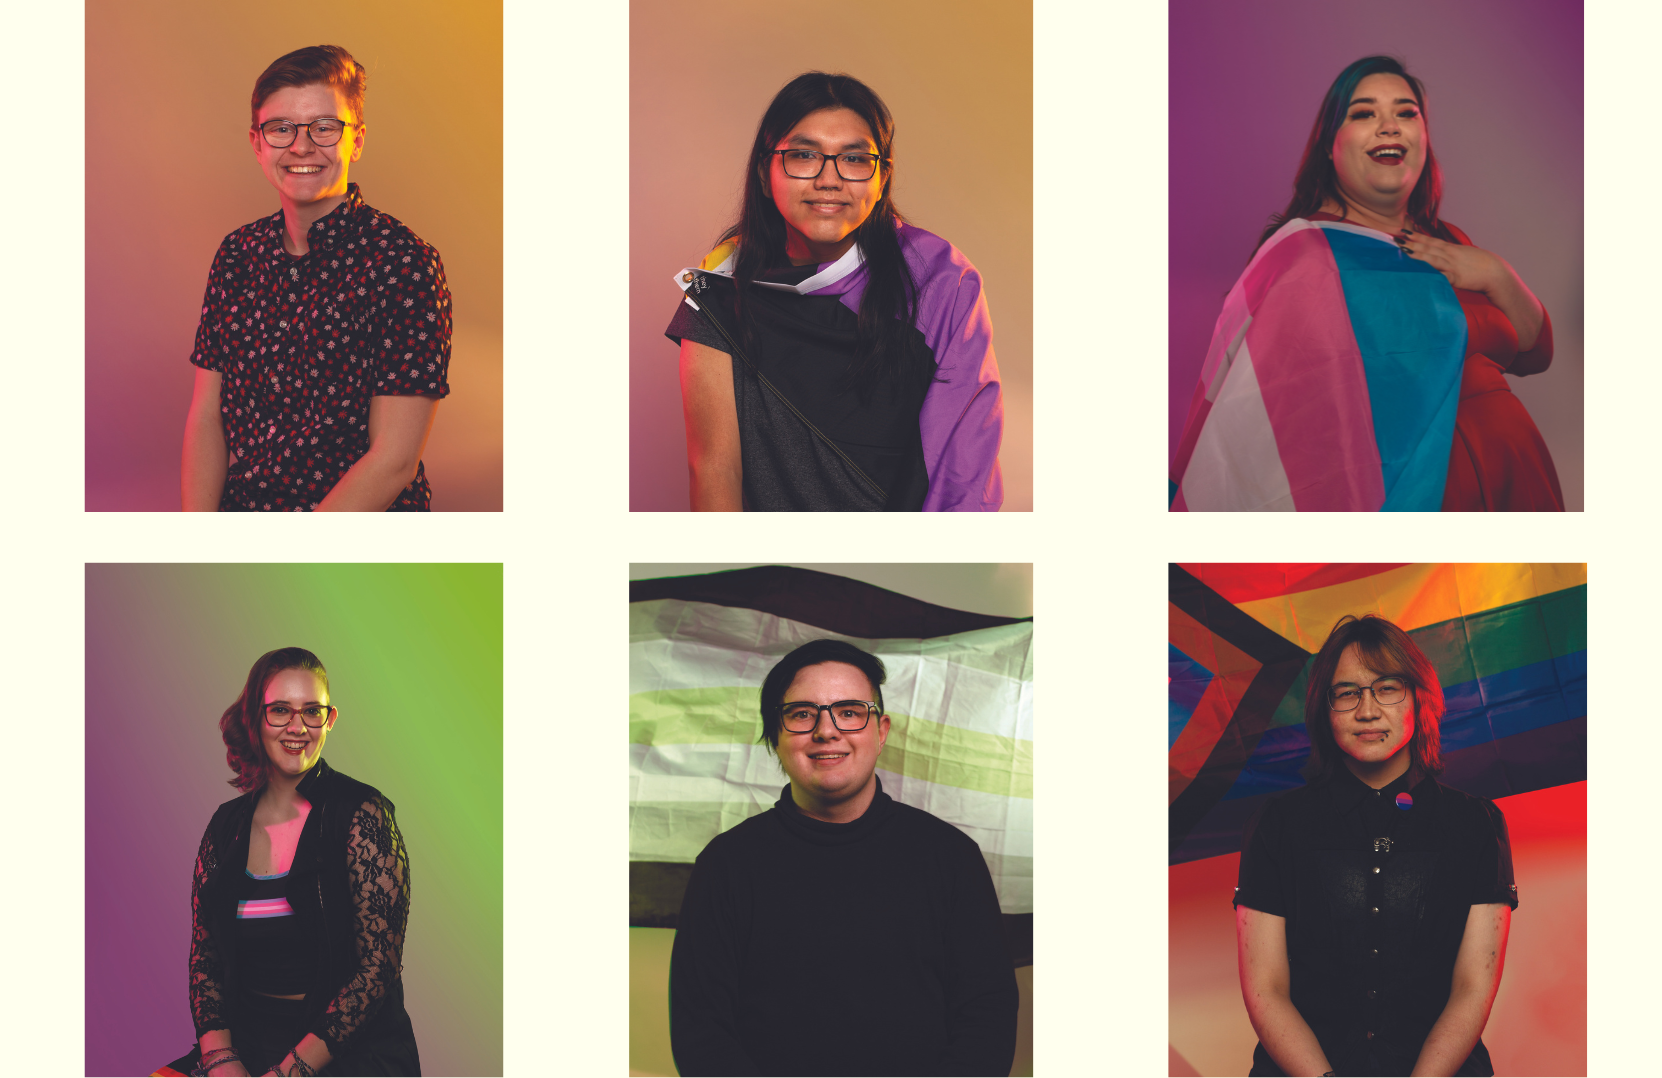 Here and queer: MacEwan’s 2SLGBTQIA student group